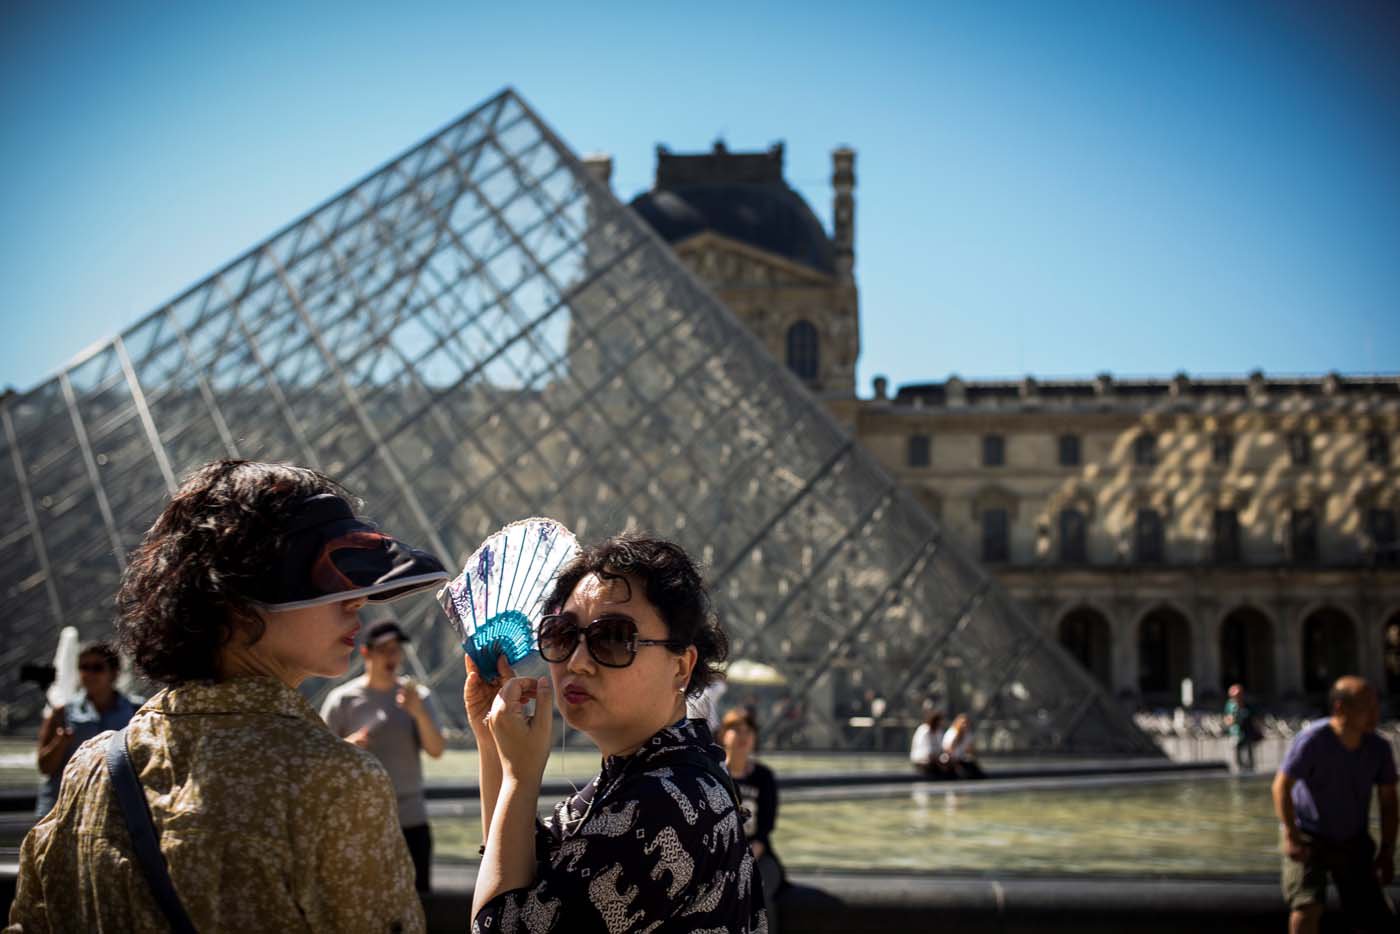 (FILES) This file photo taken on August 25, 2016 shows people standing at the Louvre museum in Paris as temperatures soar across the country. After a decline in 2016 due to the terror attacks in Paris and Nice, tourism in Paris and Ile de France is in much better shape in the first half of 2017, with 1,5 million tourists and 3,3 million overnight stays more than a year ago. / AFP PHOTO / LIONEL BONAVENTURE